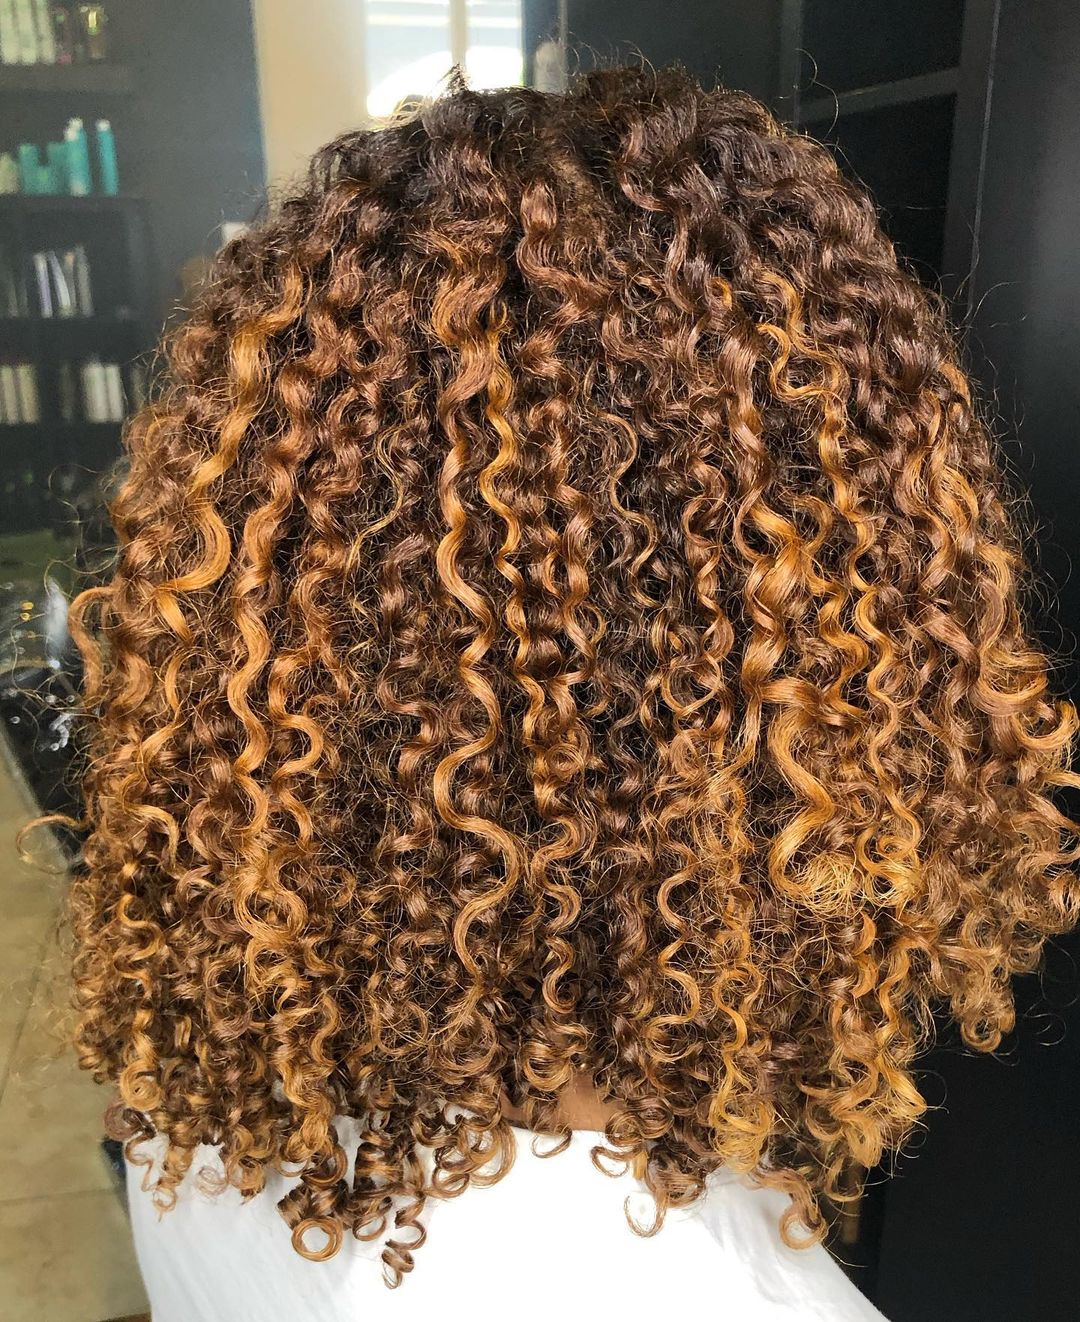 blonde highlights on naturally curly black hair